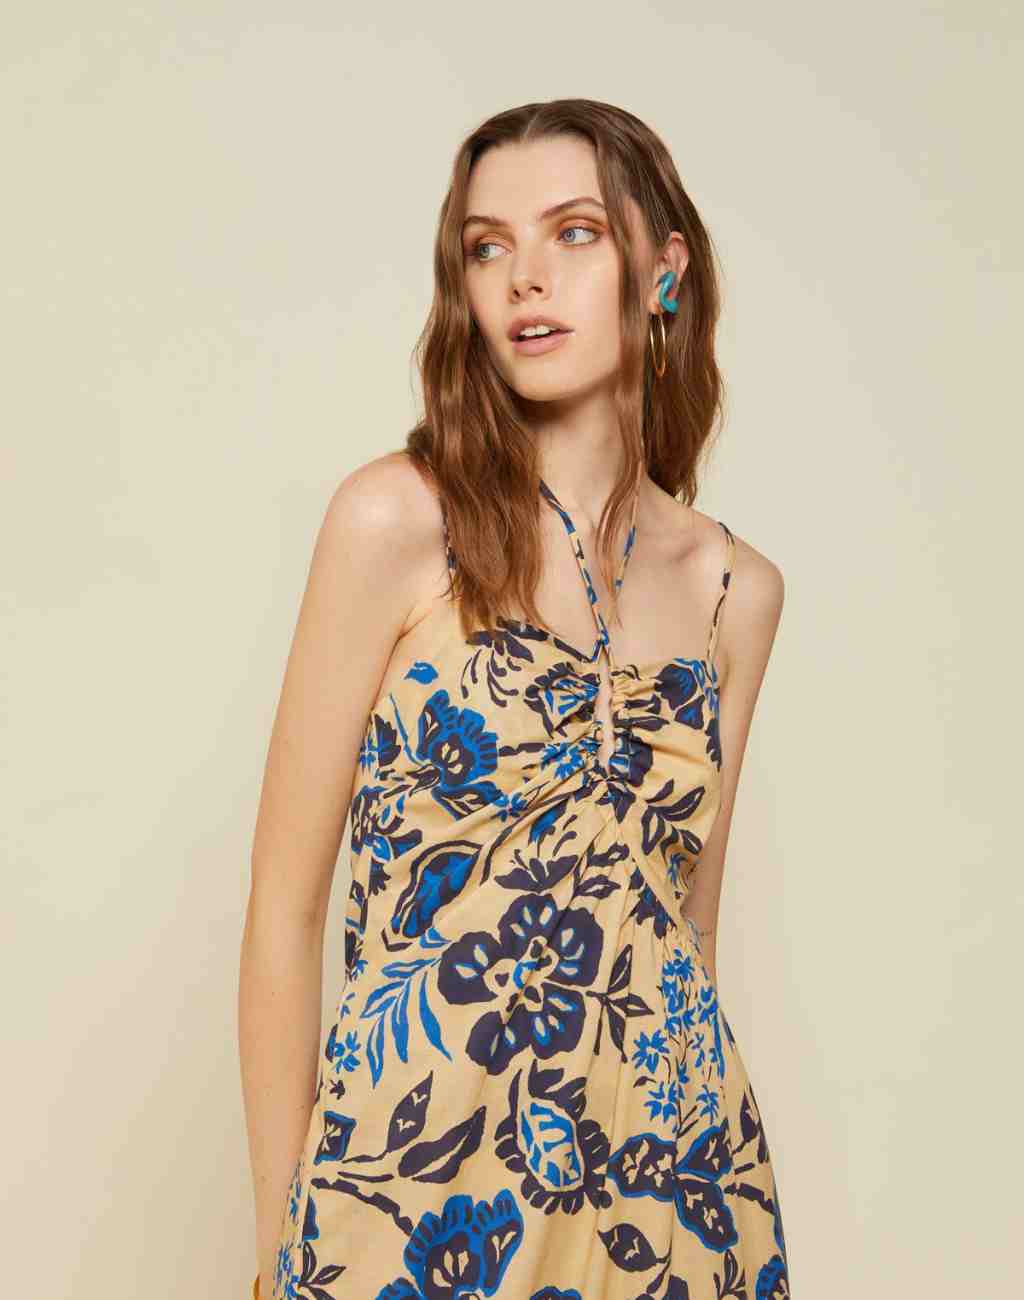 Cotton Midi Dress with Floral Print and Halter Neck Ties